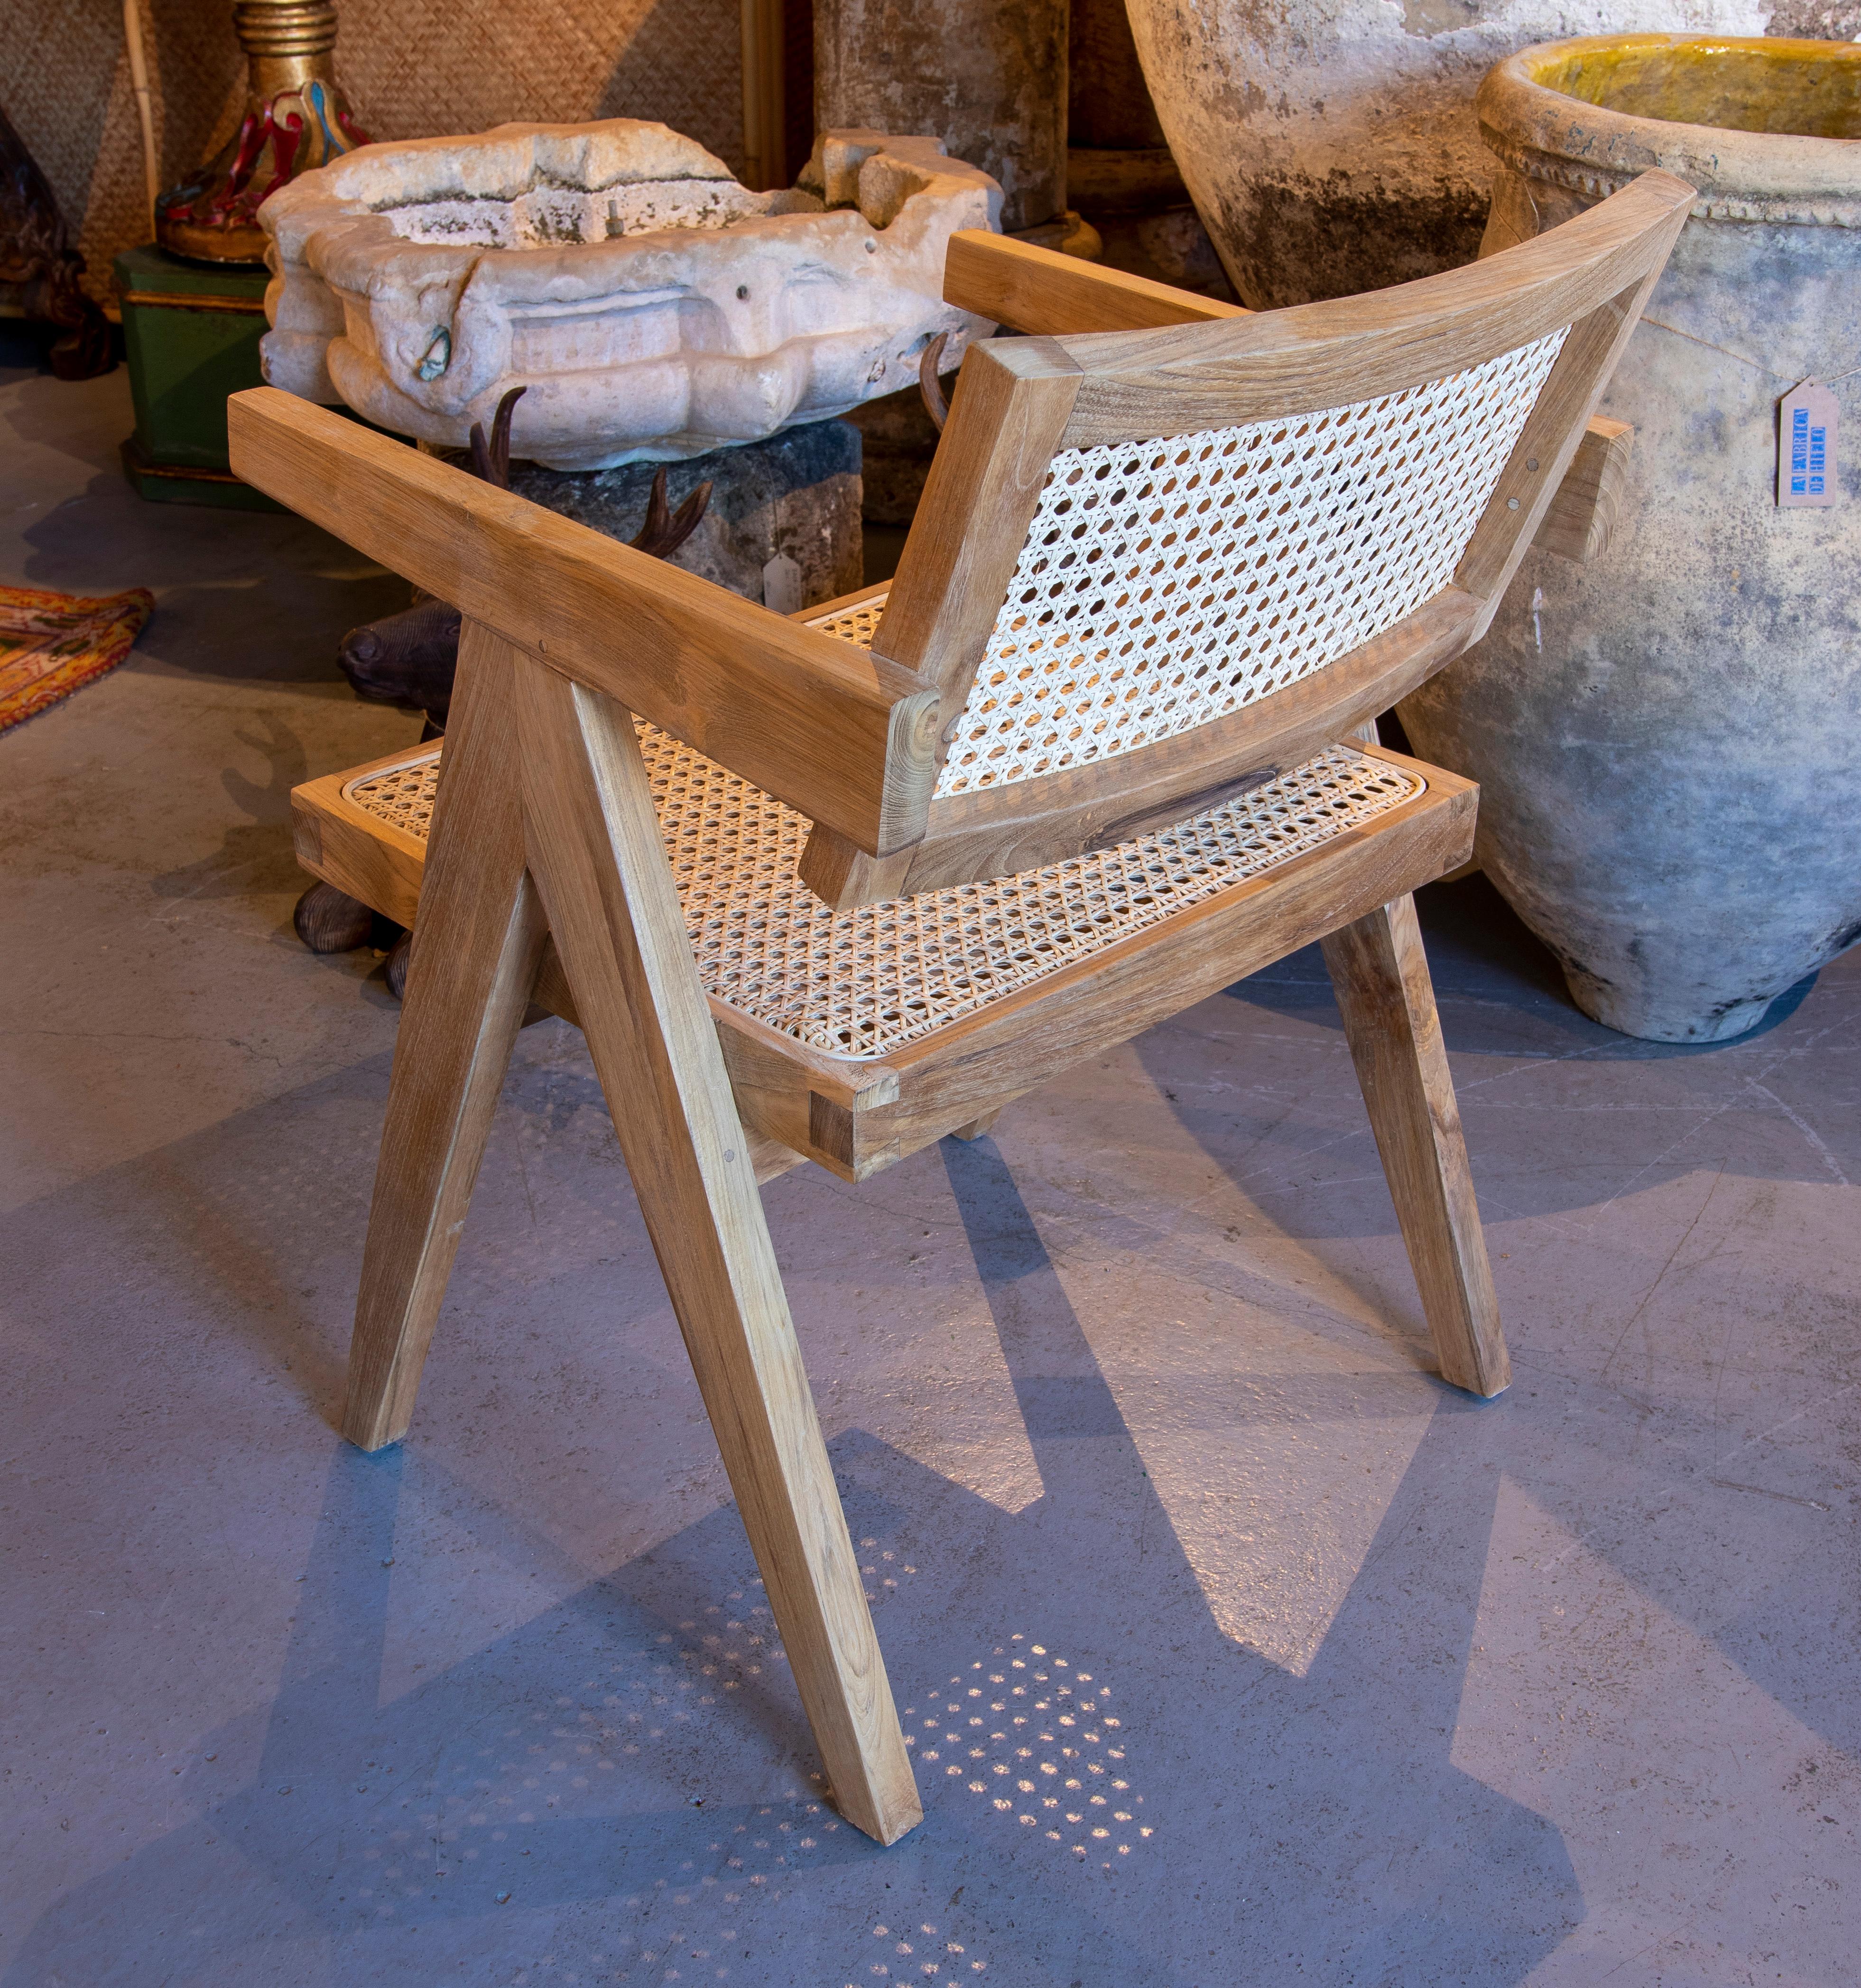 Set of Wooden Chairs and Seat with Wicker Backrest 2